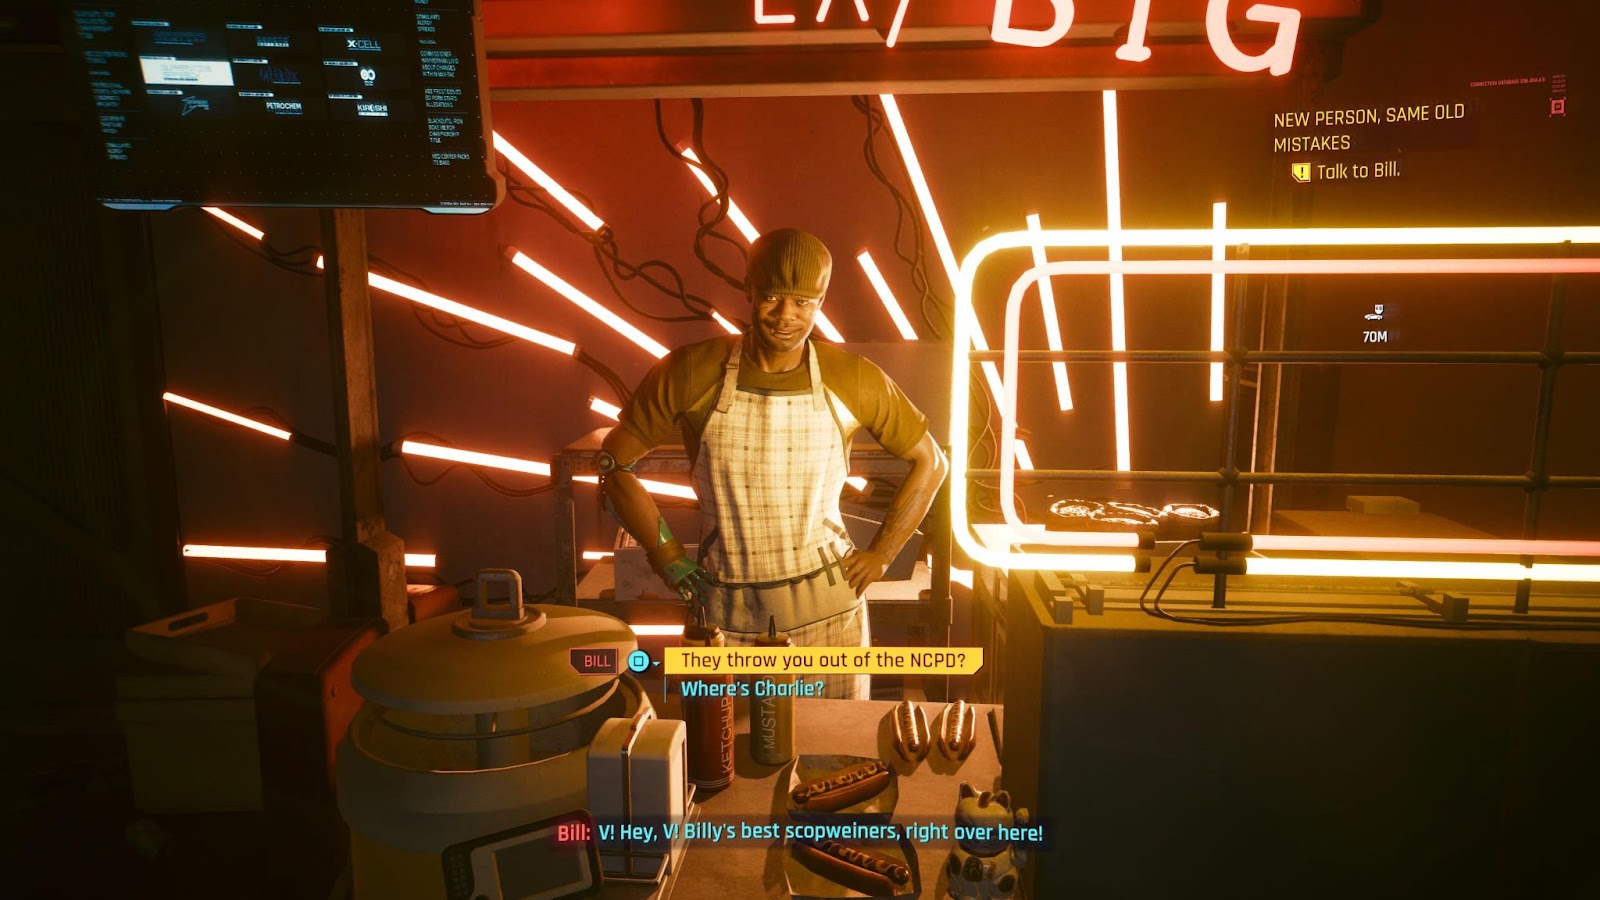 An in game screenshot of the character Bill from the game Cyberpunk 2077.